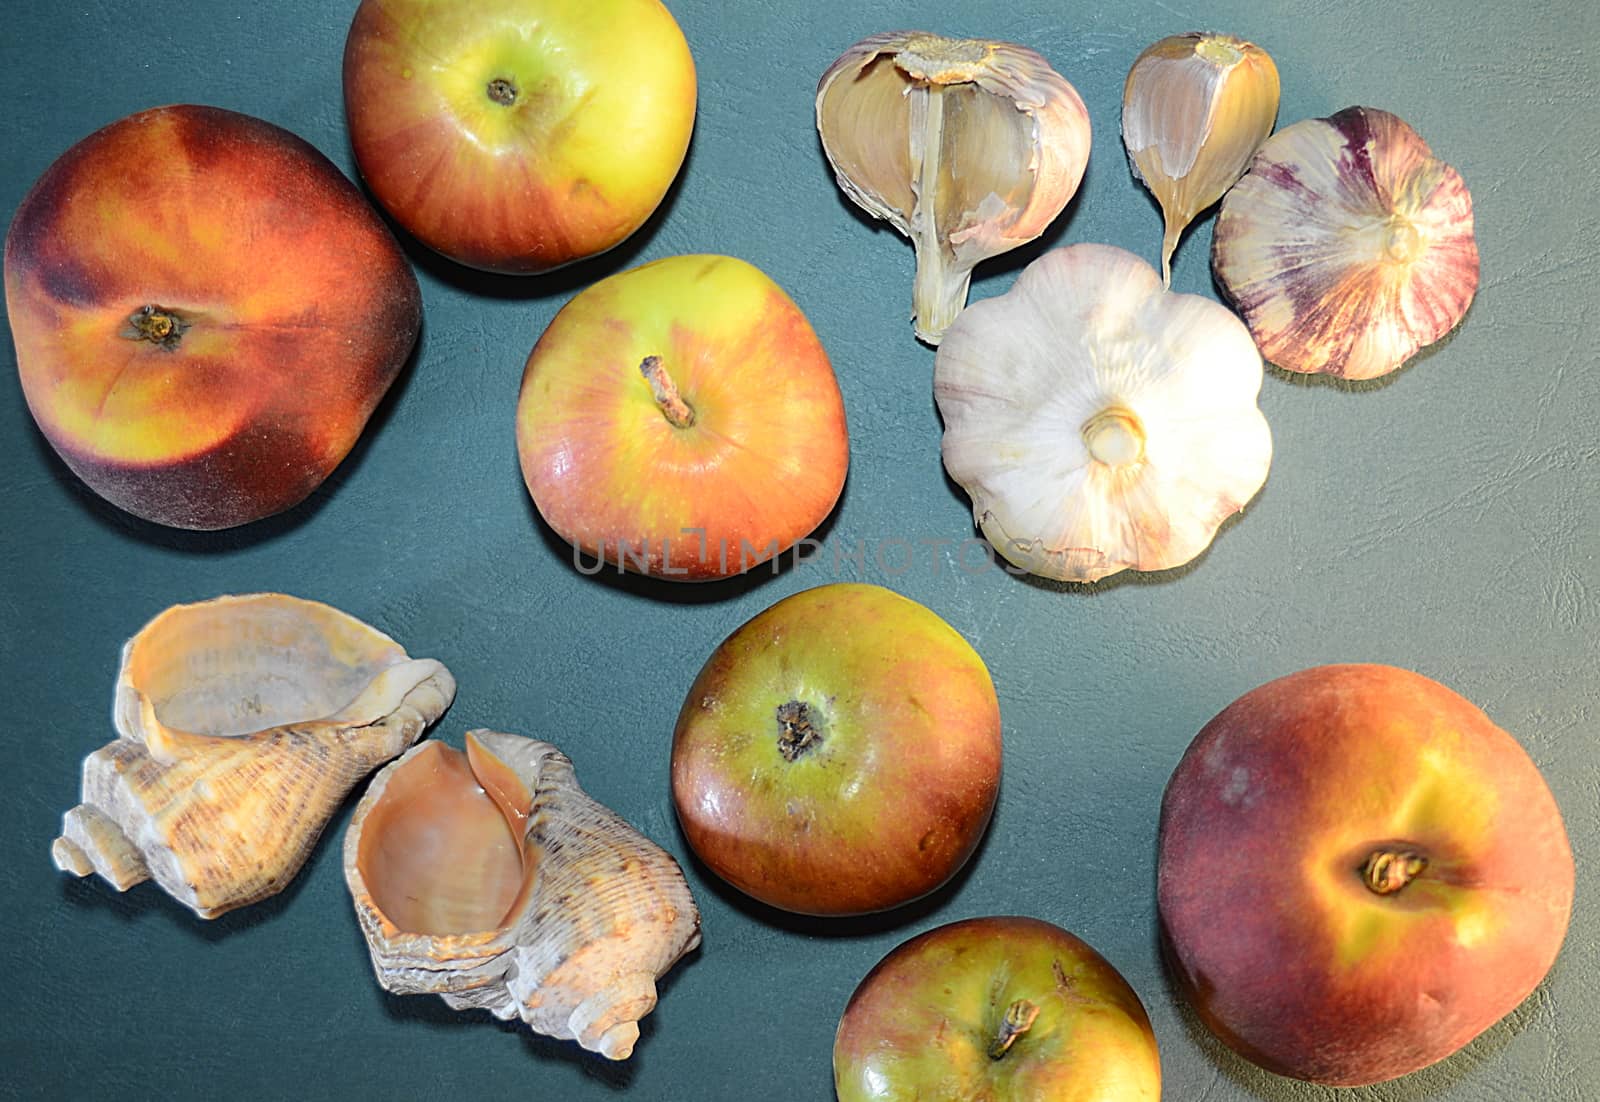 apples, peaches, garlic and seashells - still life on a blue skin background